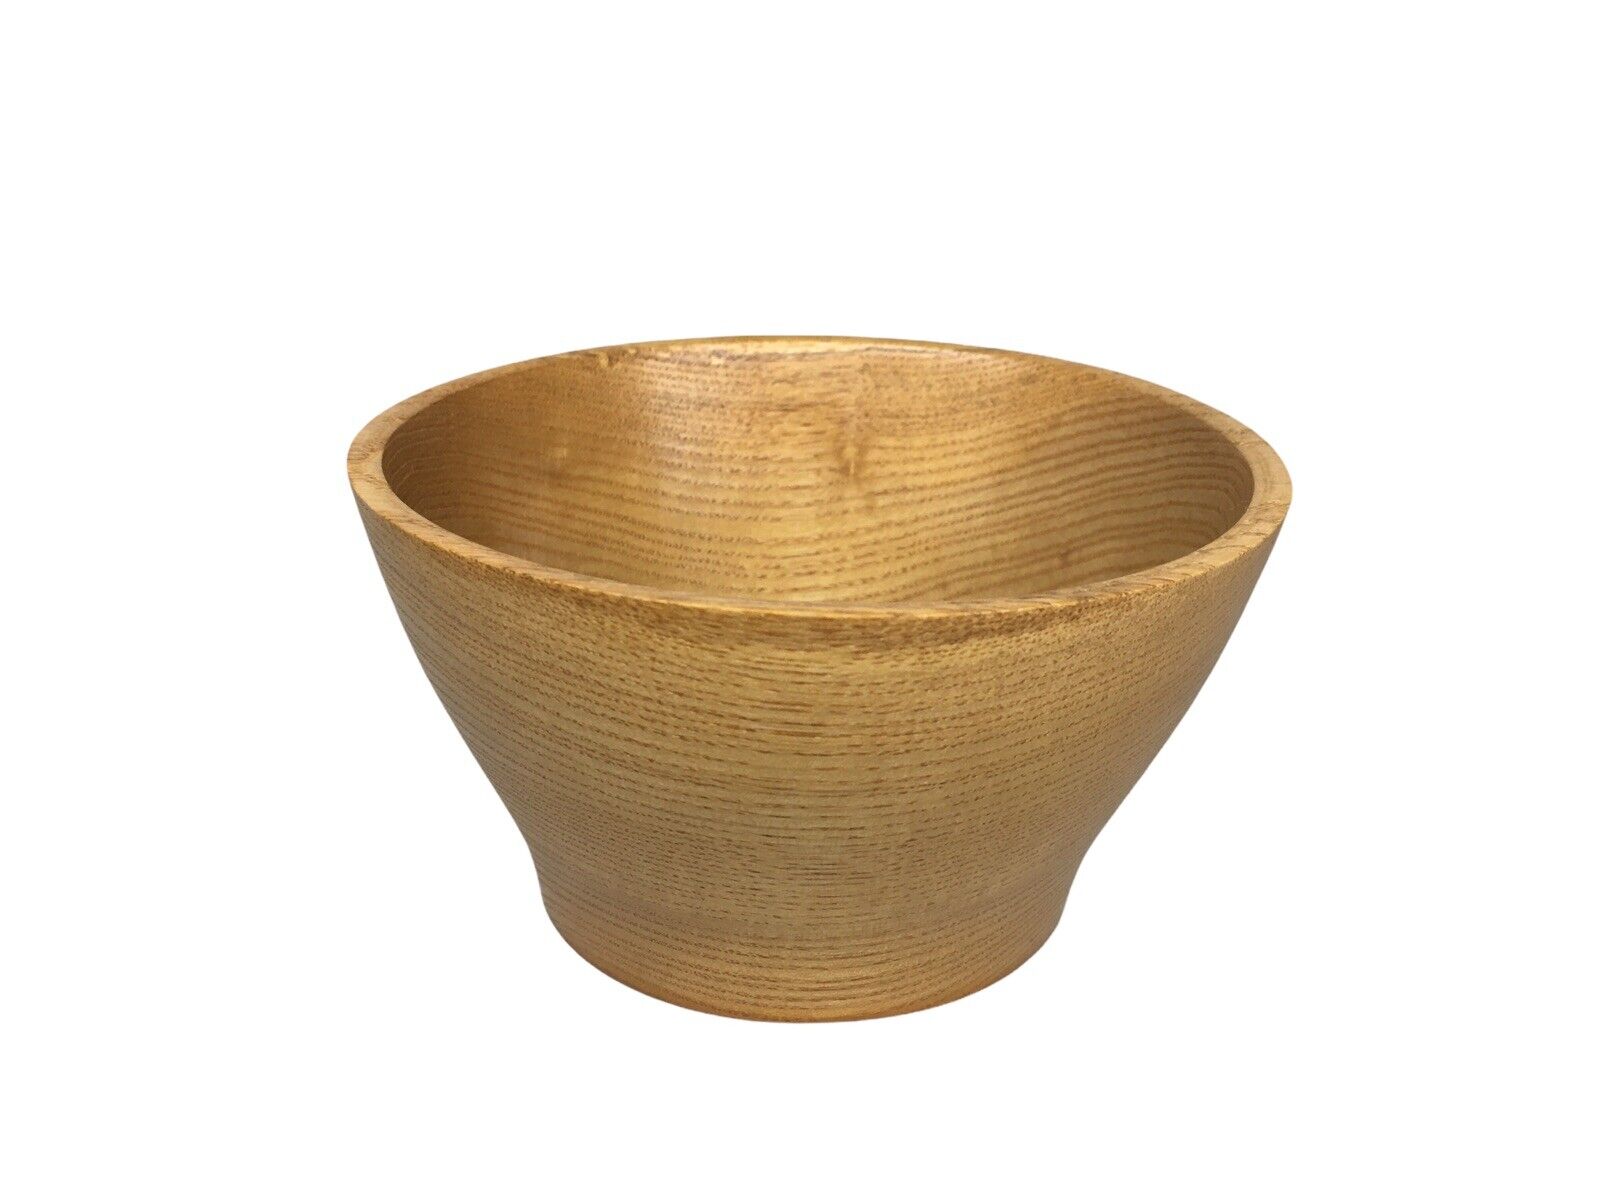 Hand Turned Oak Max 67% OFF of fixed price 88% OFF Wood Bowl Round Signed 3”X5” Small